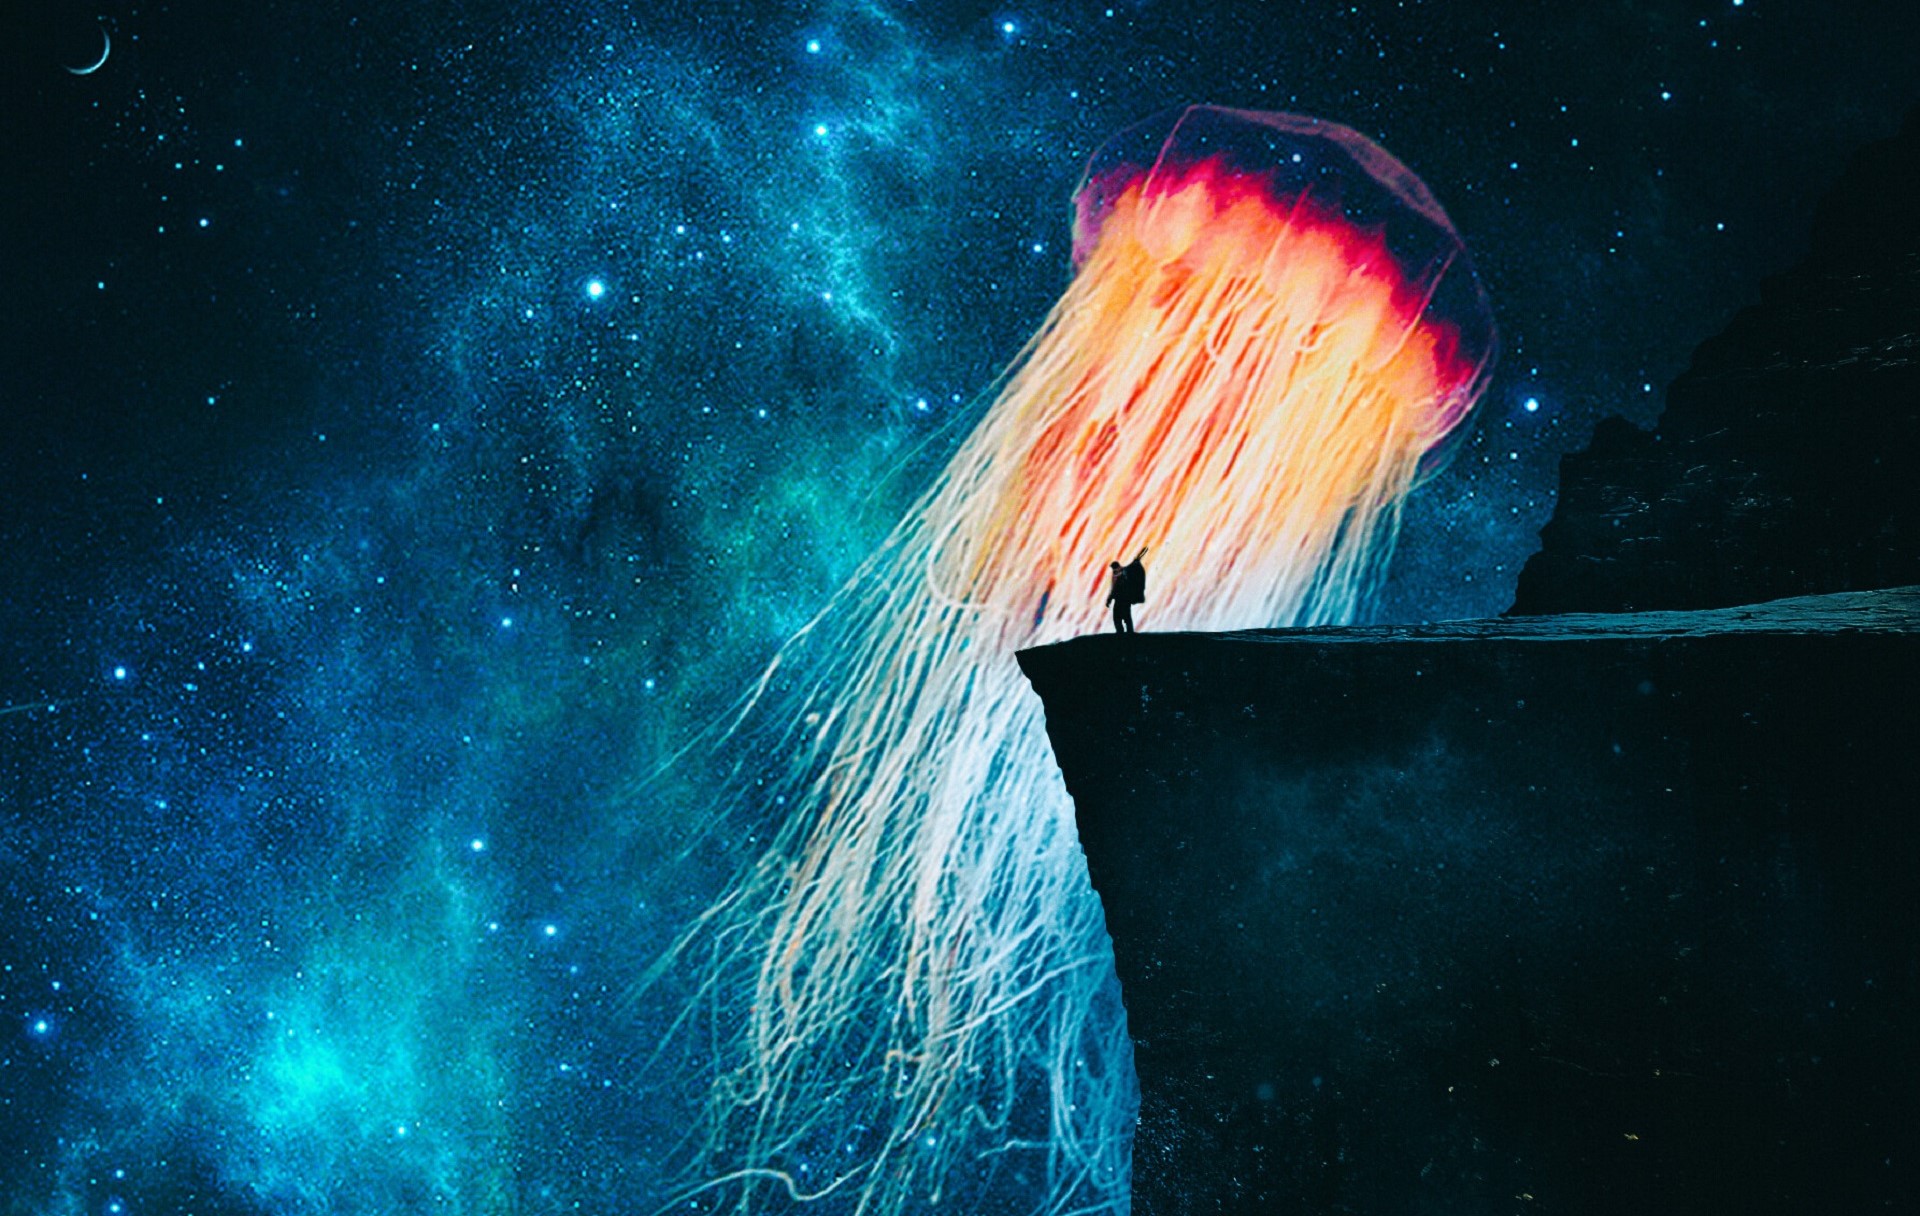 Man on a Cliff looking at Giant Blue Jellyfish in Space